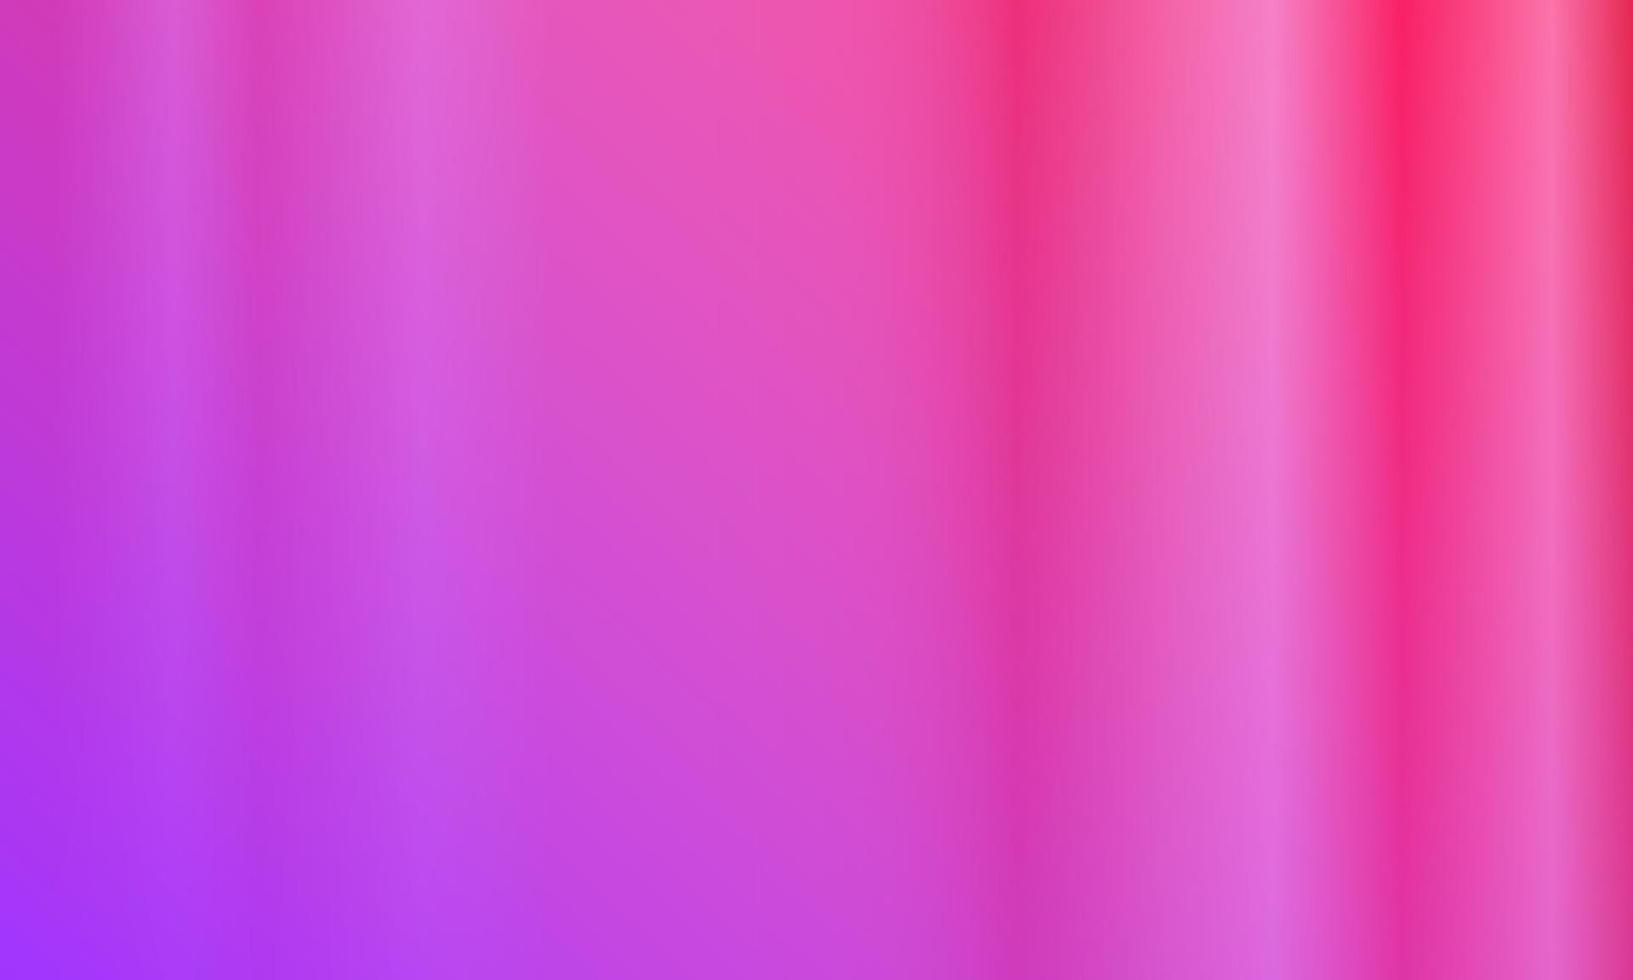 shining purple and red vertical gradient. abstract, modern and colorful style. great for background, wallpaper, card, cover, poster, banner or flyer vector